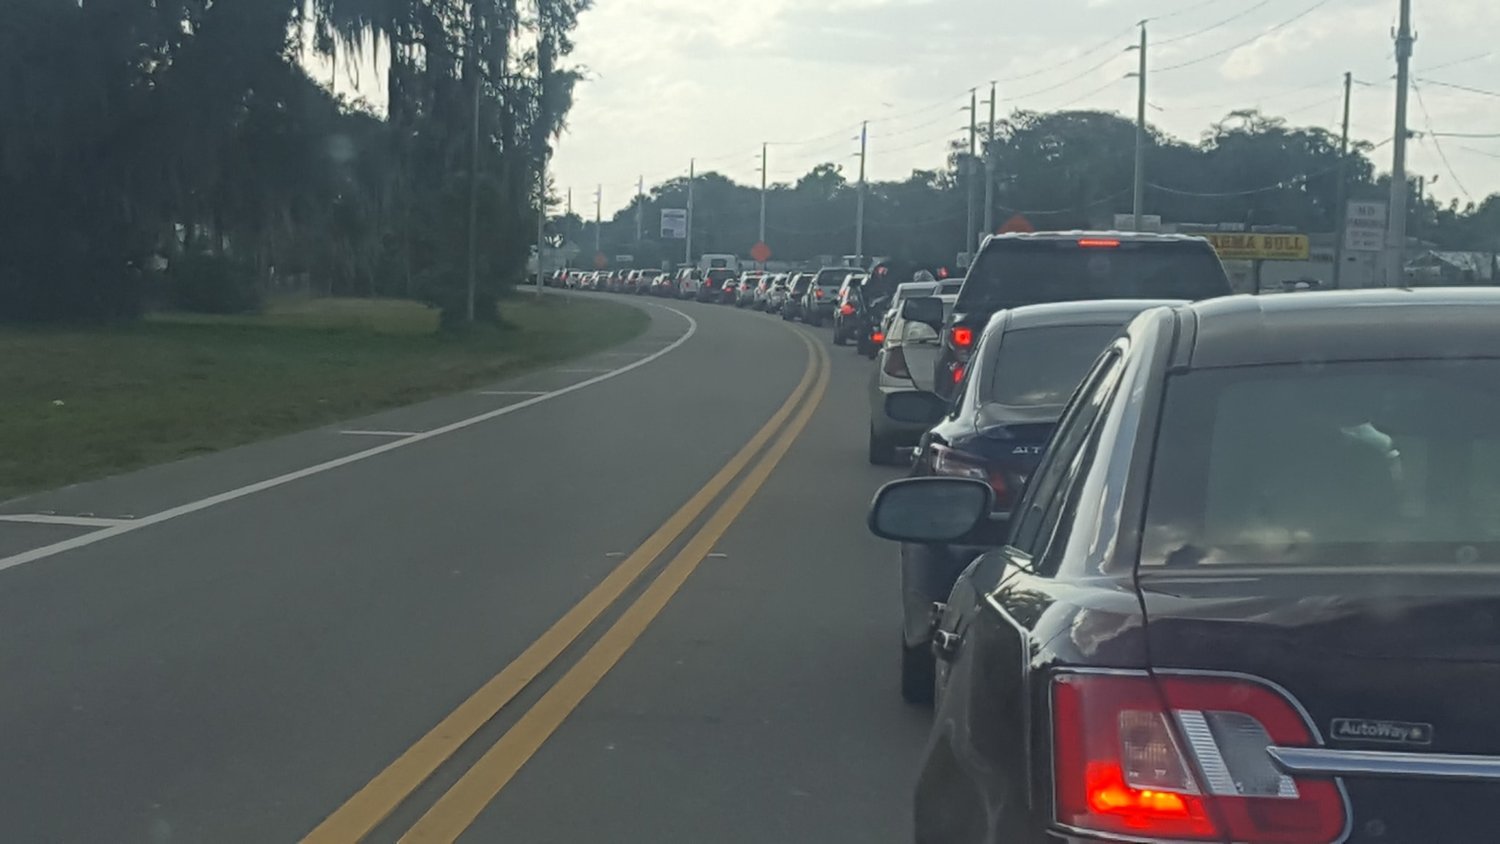 Traffic was backed up on U.S. 441 S.E. as evidenced by this photo shared on Facebook.